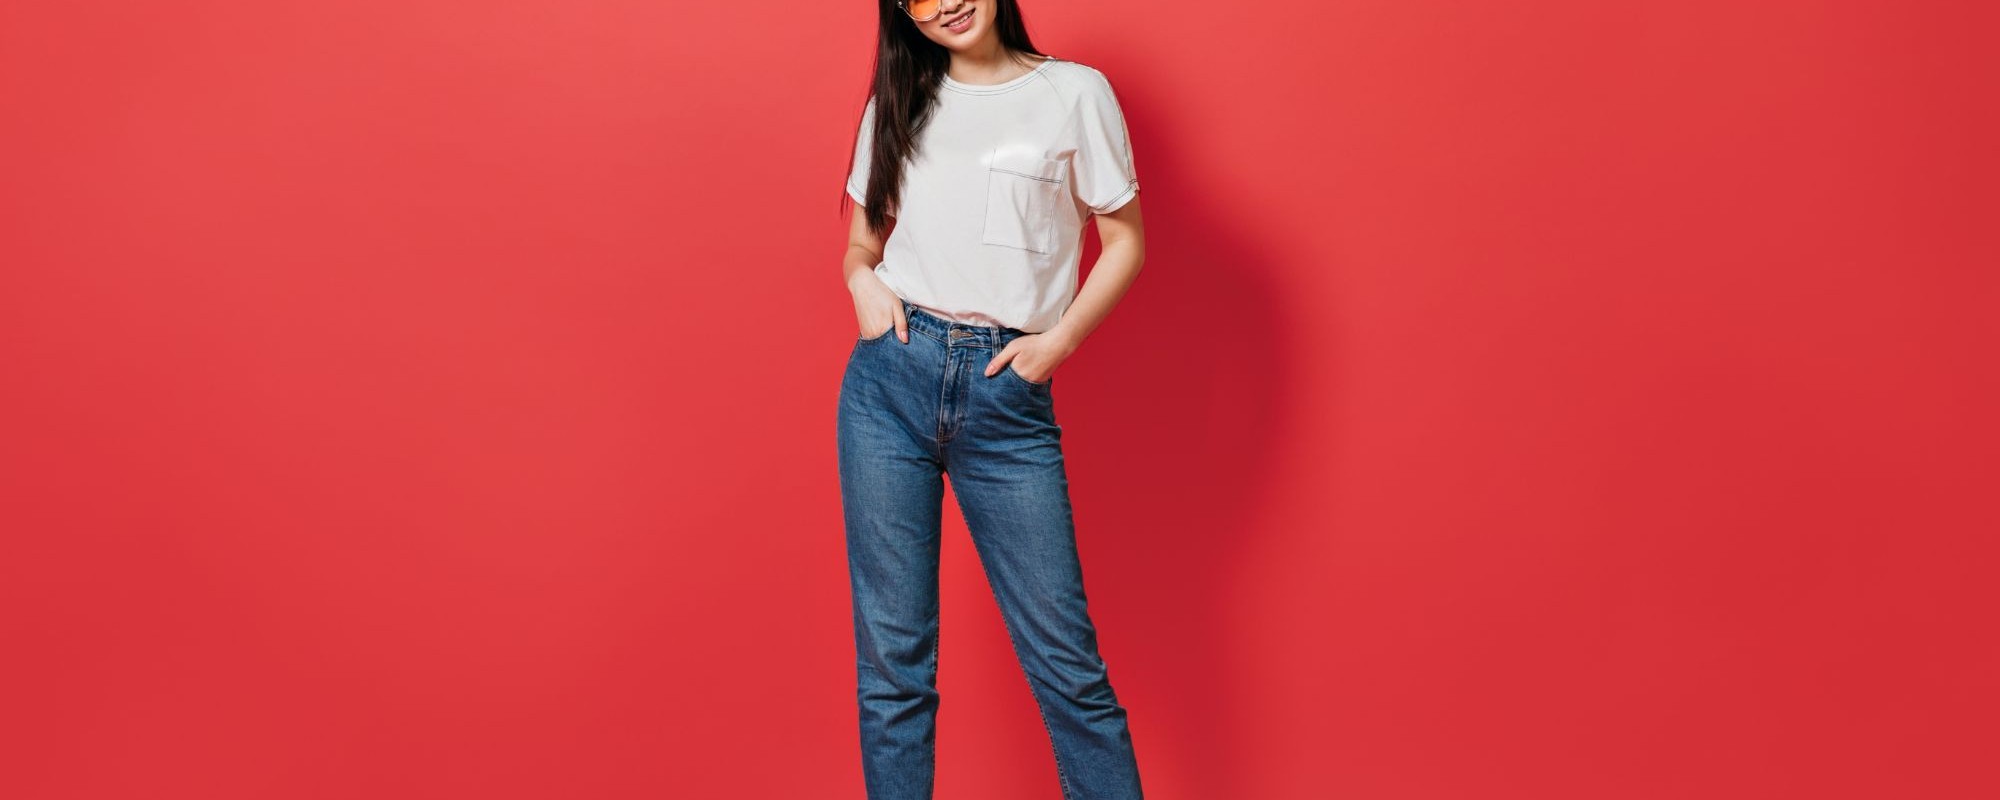 portrait-woman-full-growth-wearing-white-t-shirt-jeans